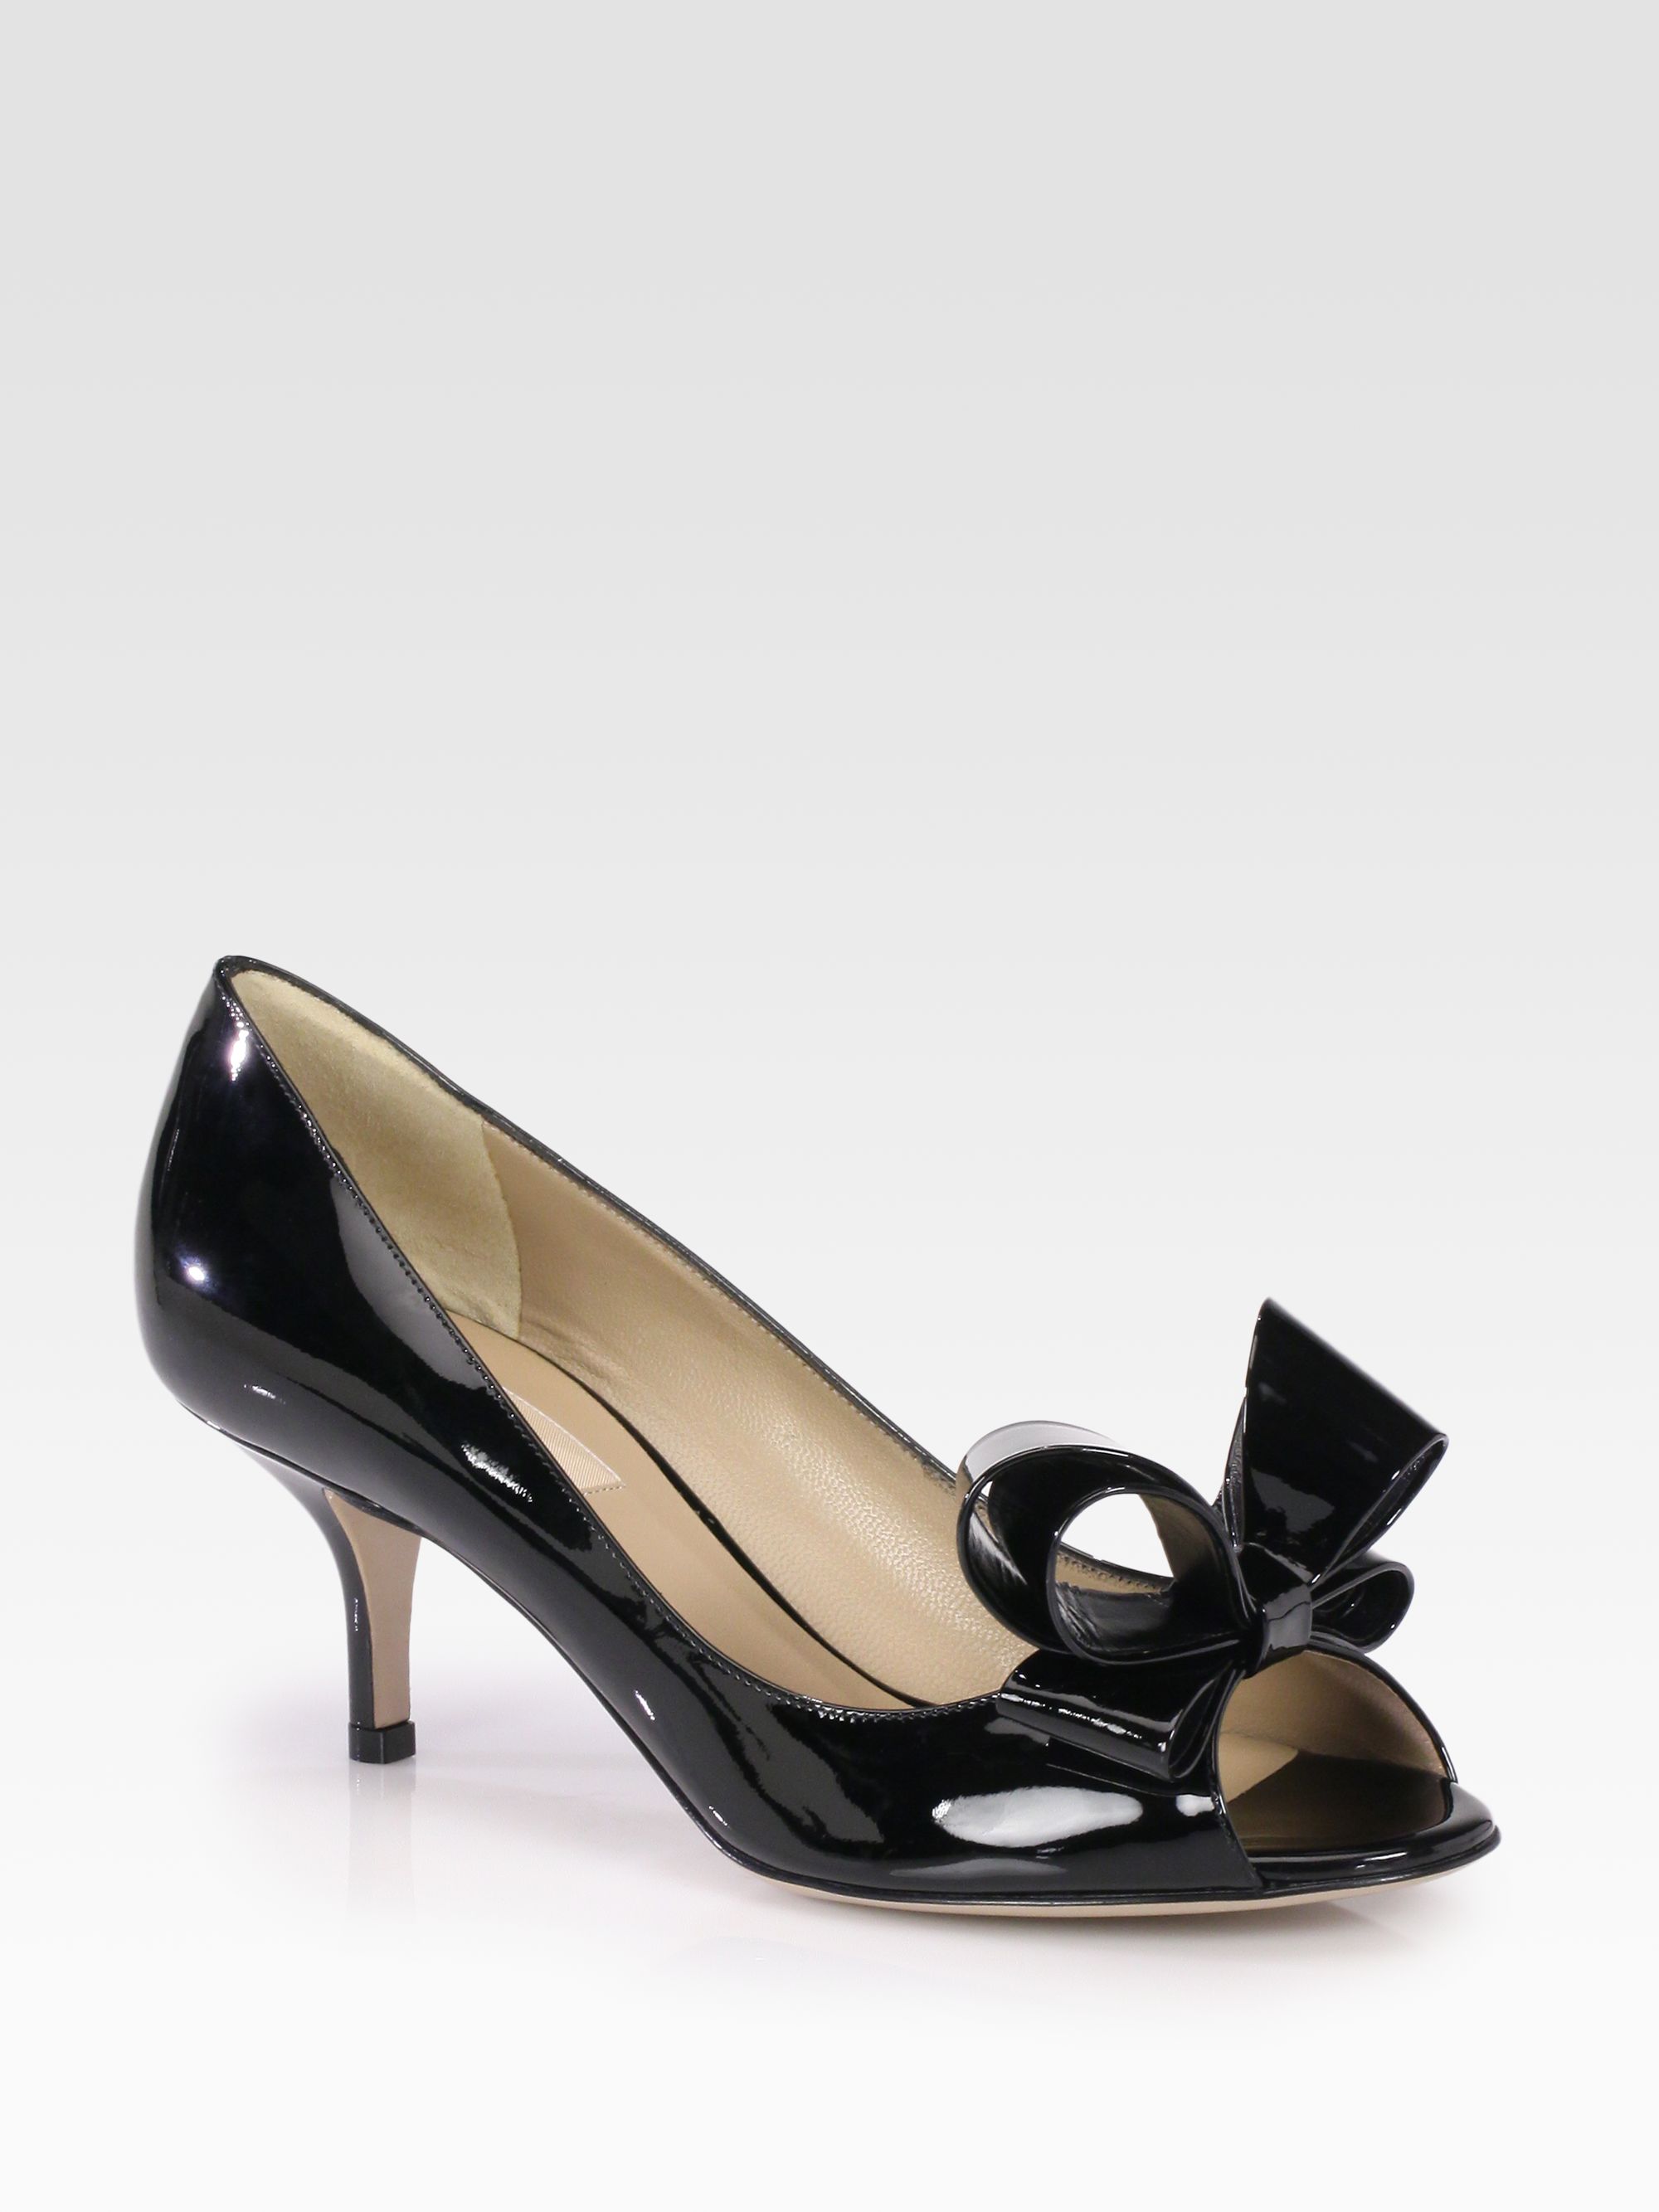 Lyst - Valentino Patent Leather Bow Pumps in Black